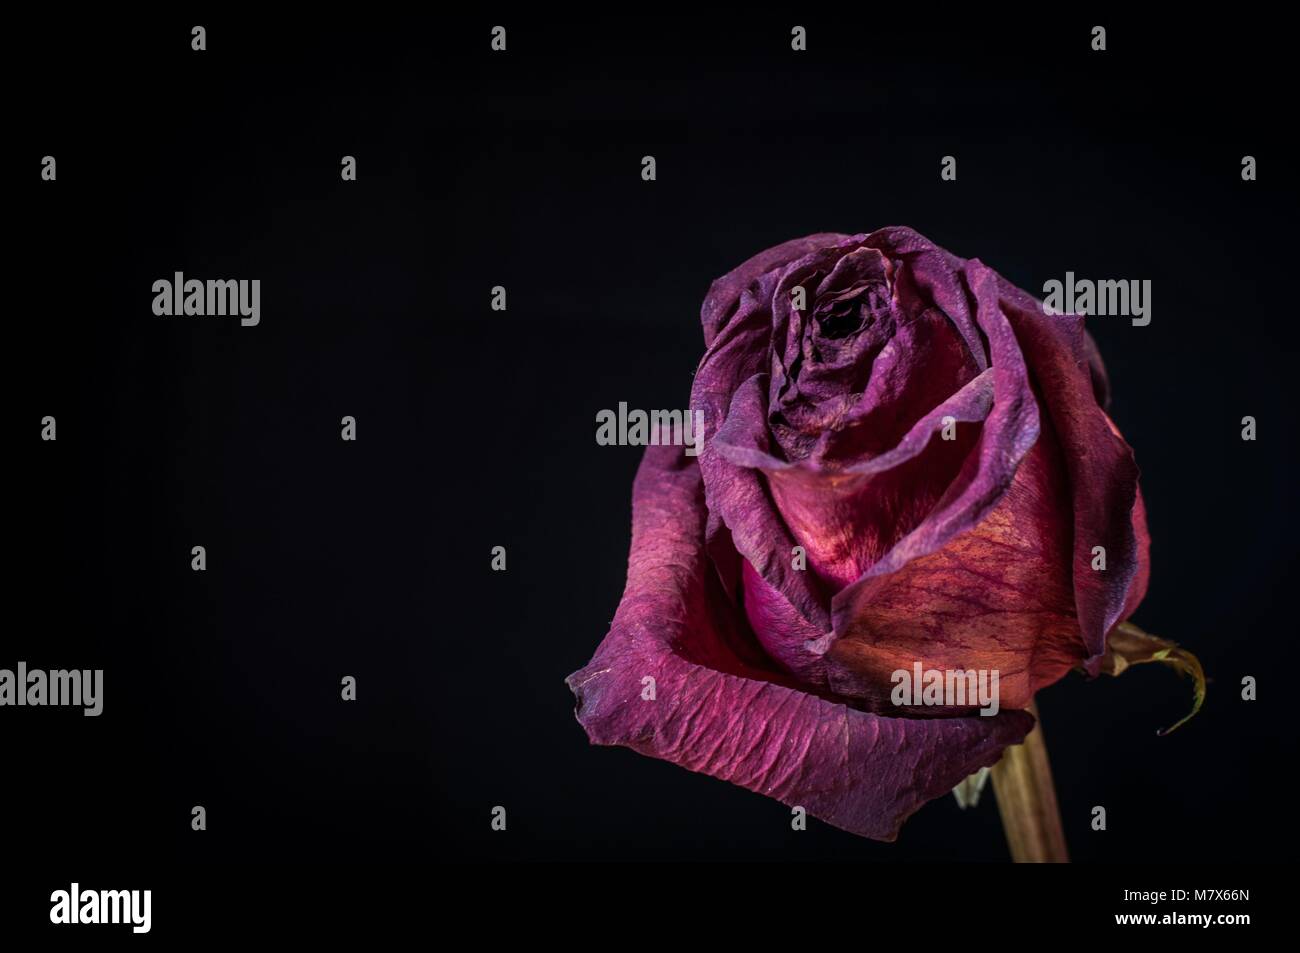 A single, dried up, dead rose against a black background Stock Photo